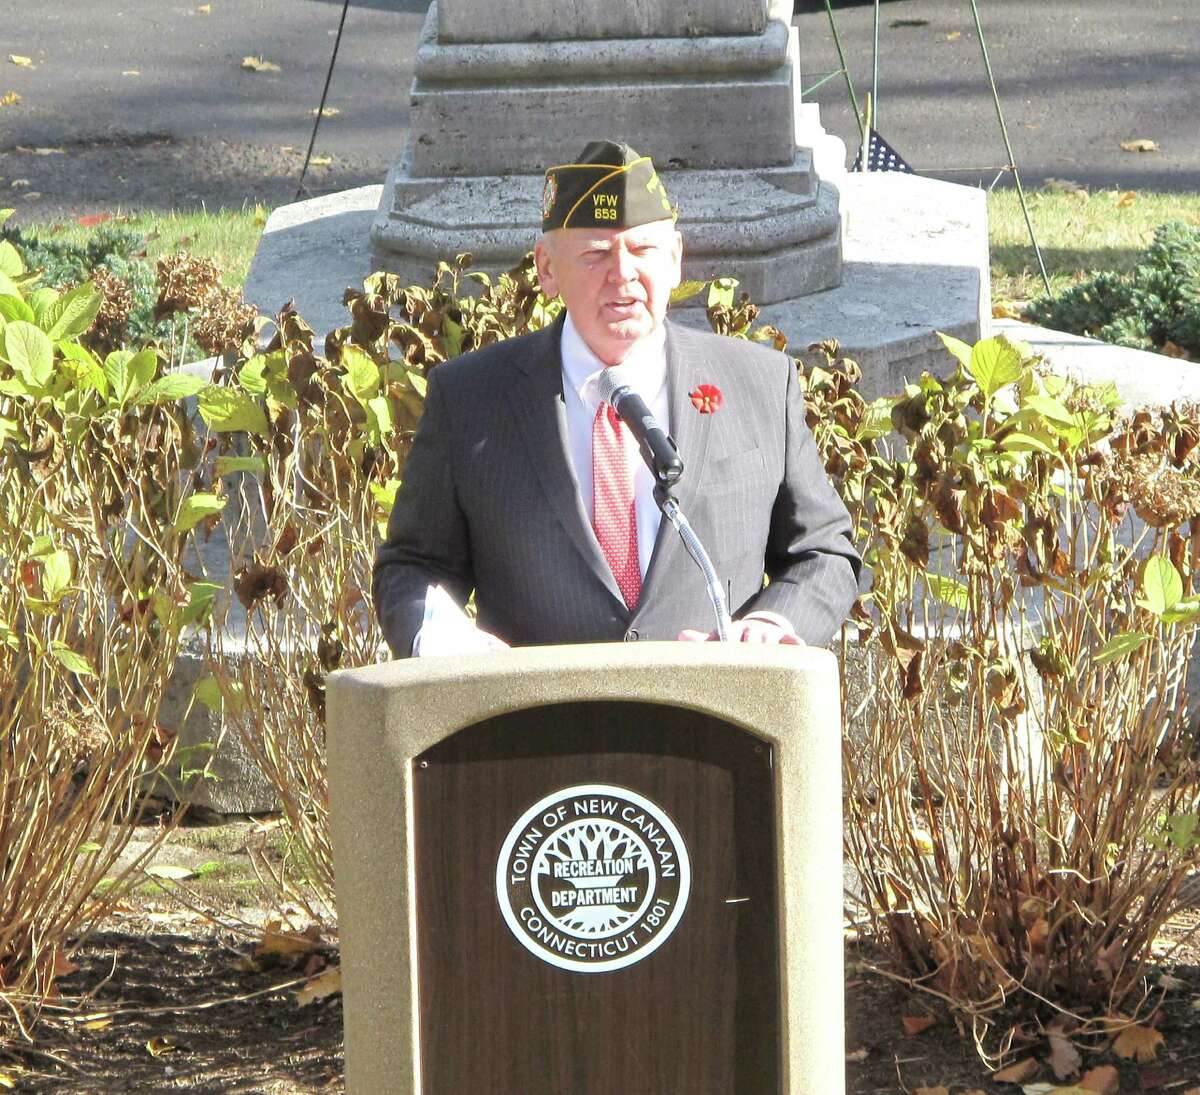 New Canaan Veterans of Foreign Wars Commander Peter Langenus officiated the town's Veterans Day ceremony. Nov. 11, 2013, New Canaan, Conn.